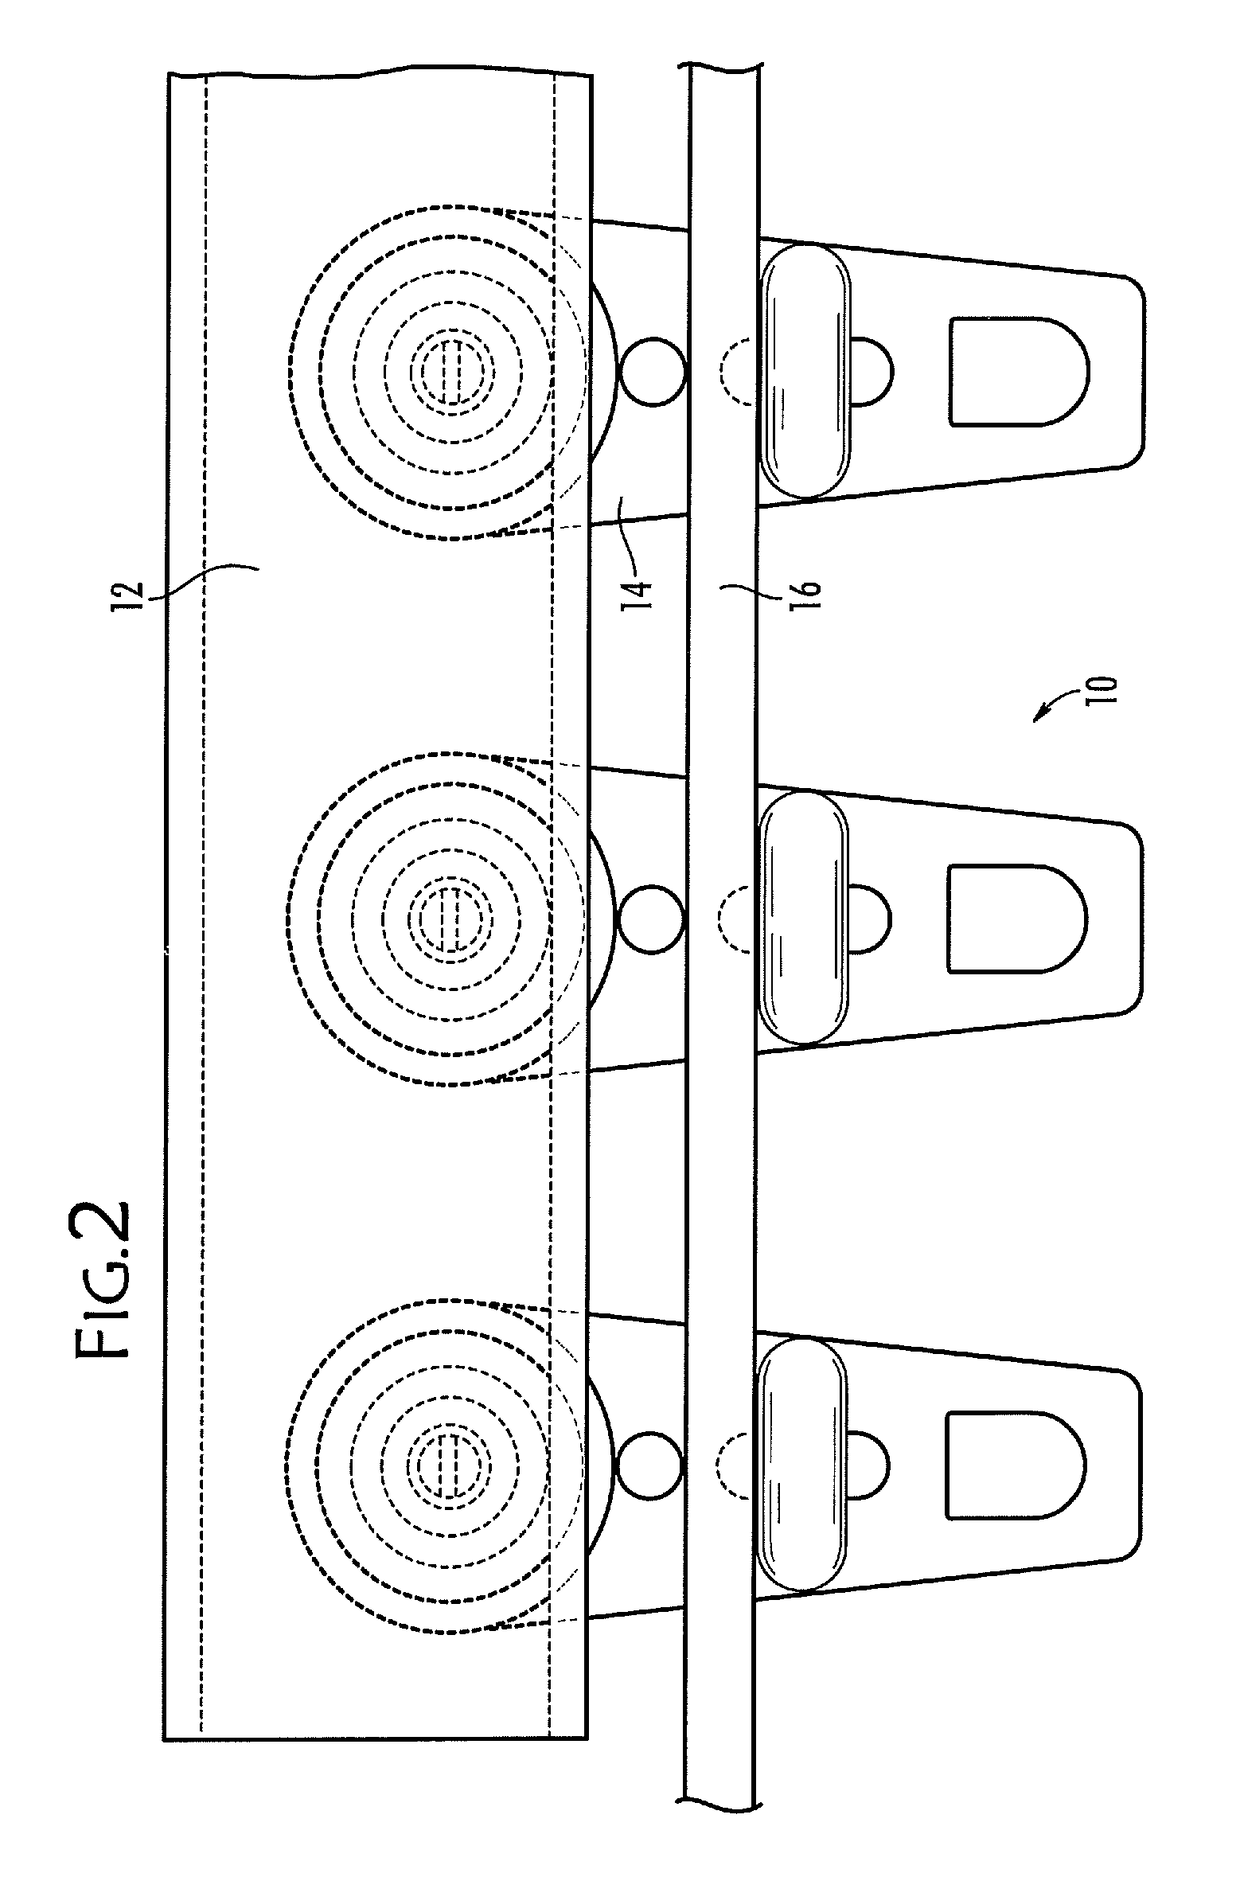 Drapery carrying method and apparatus